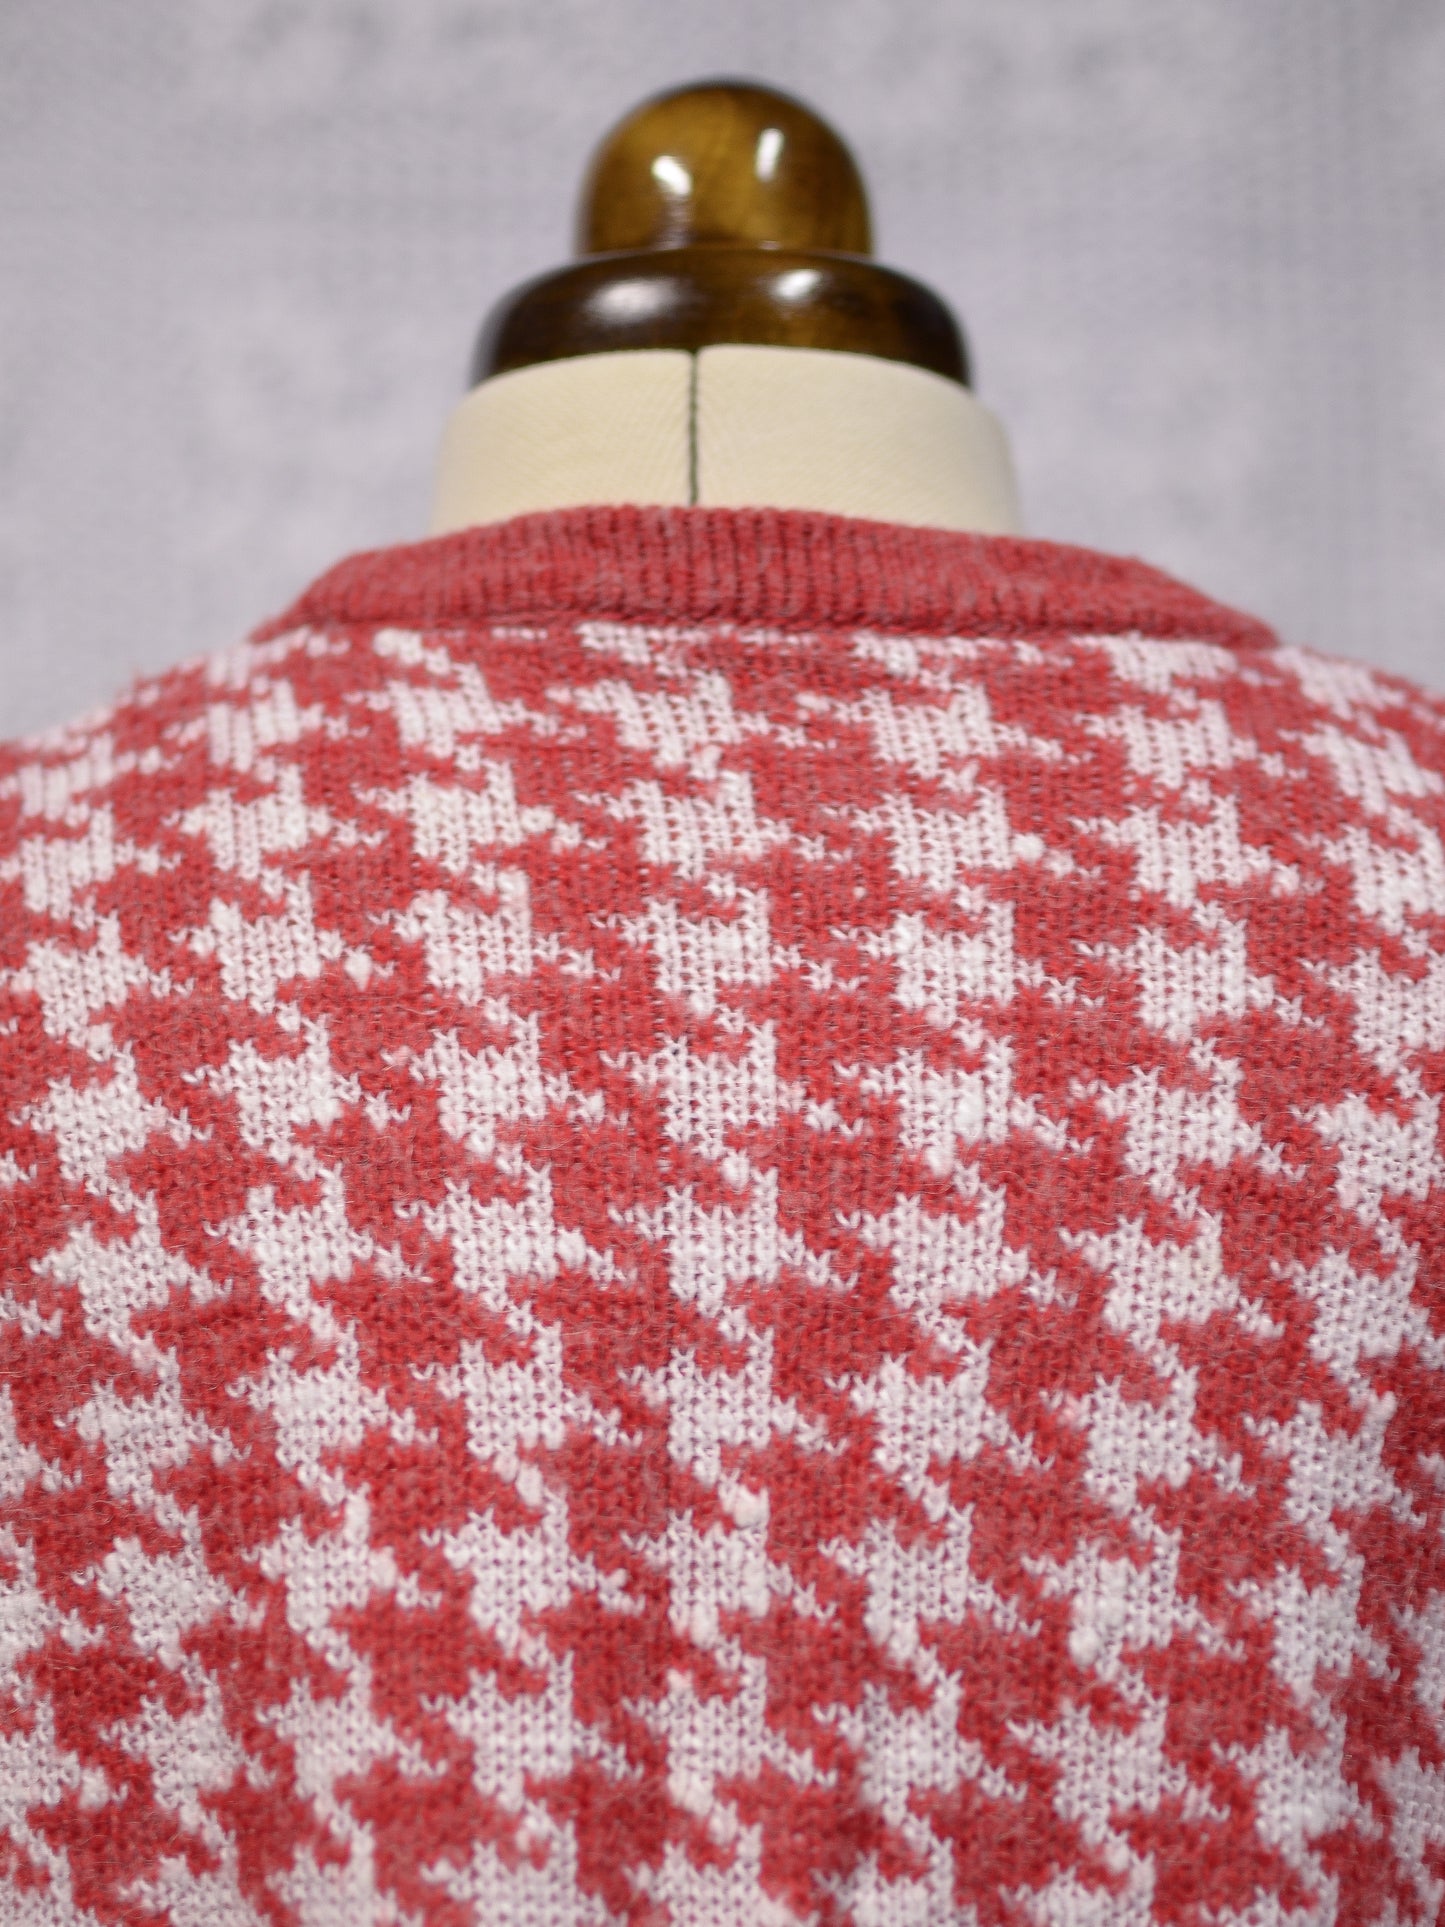 1980s red and white houndstooth pattern polar bear jumper